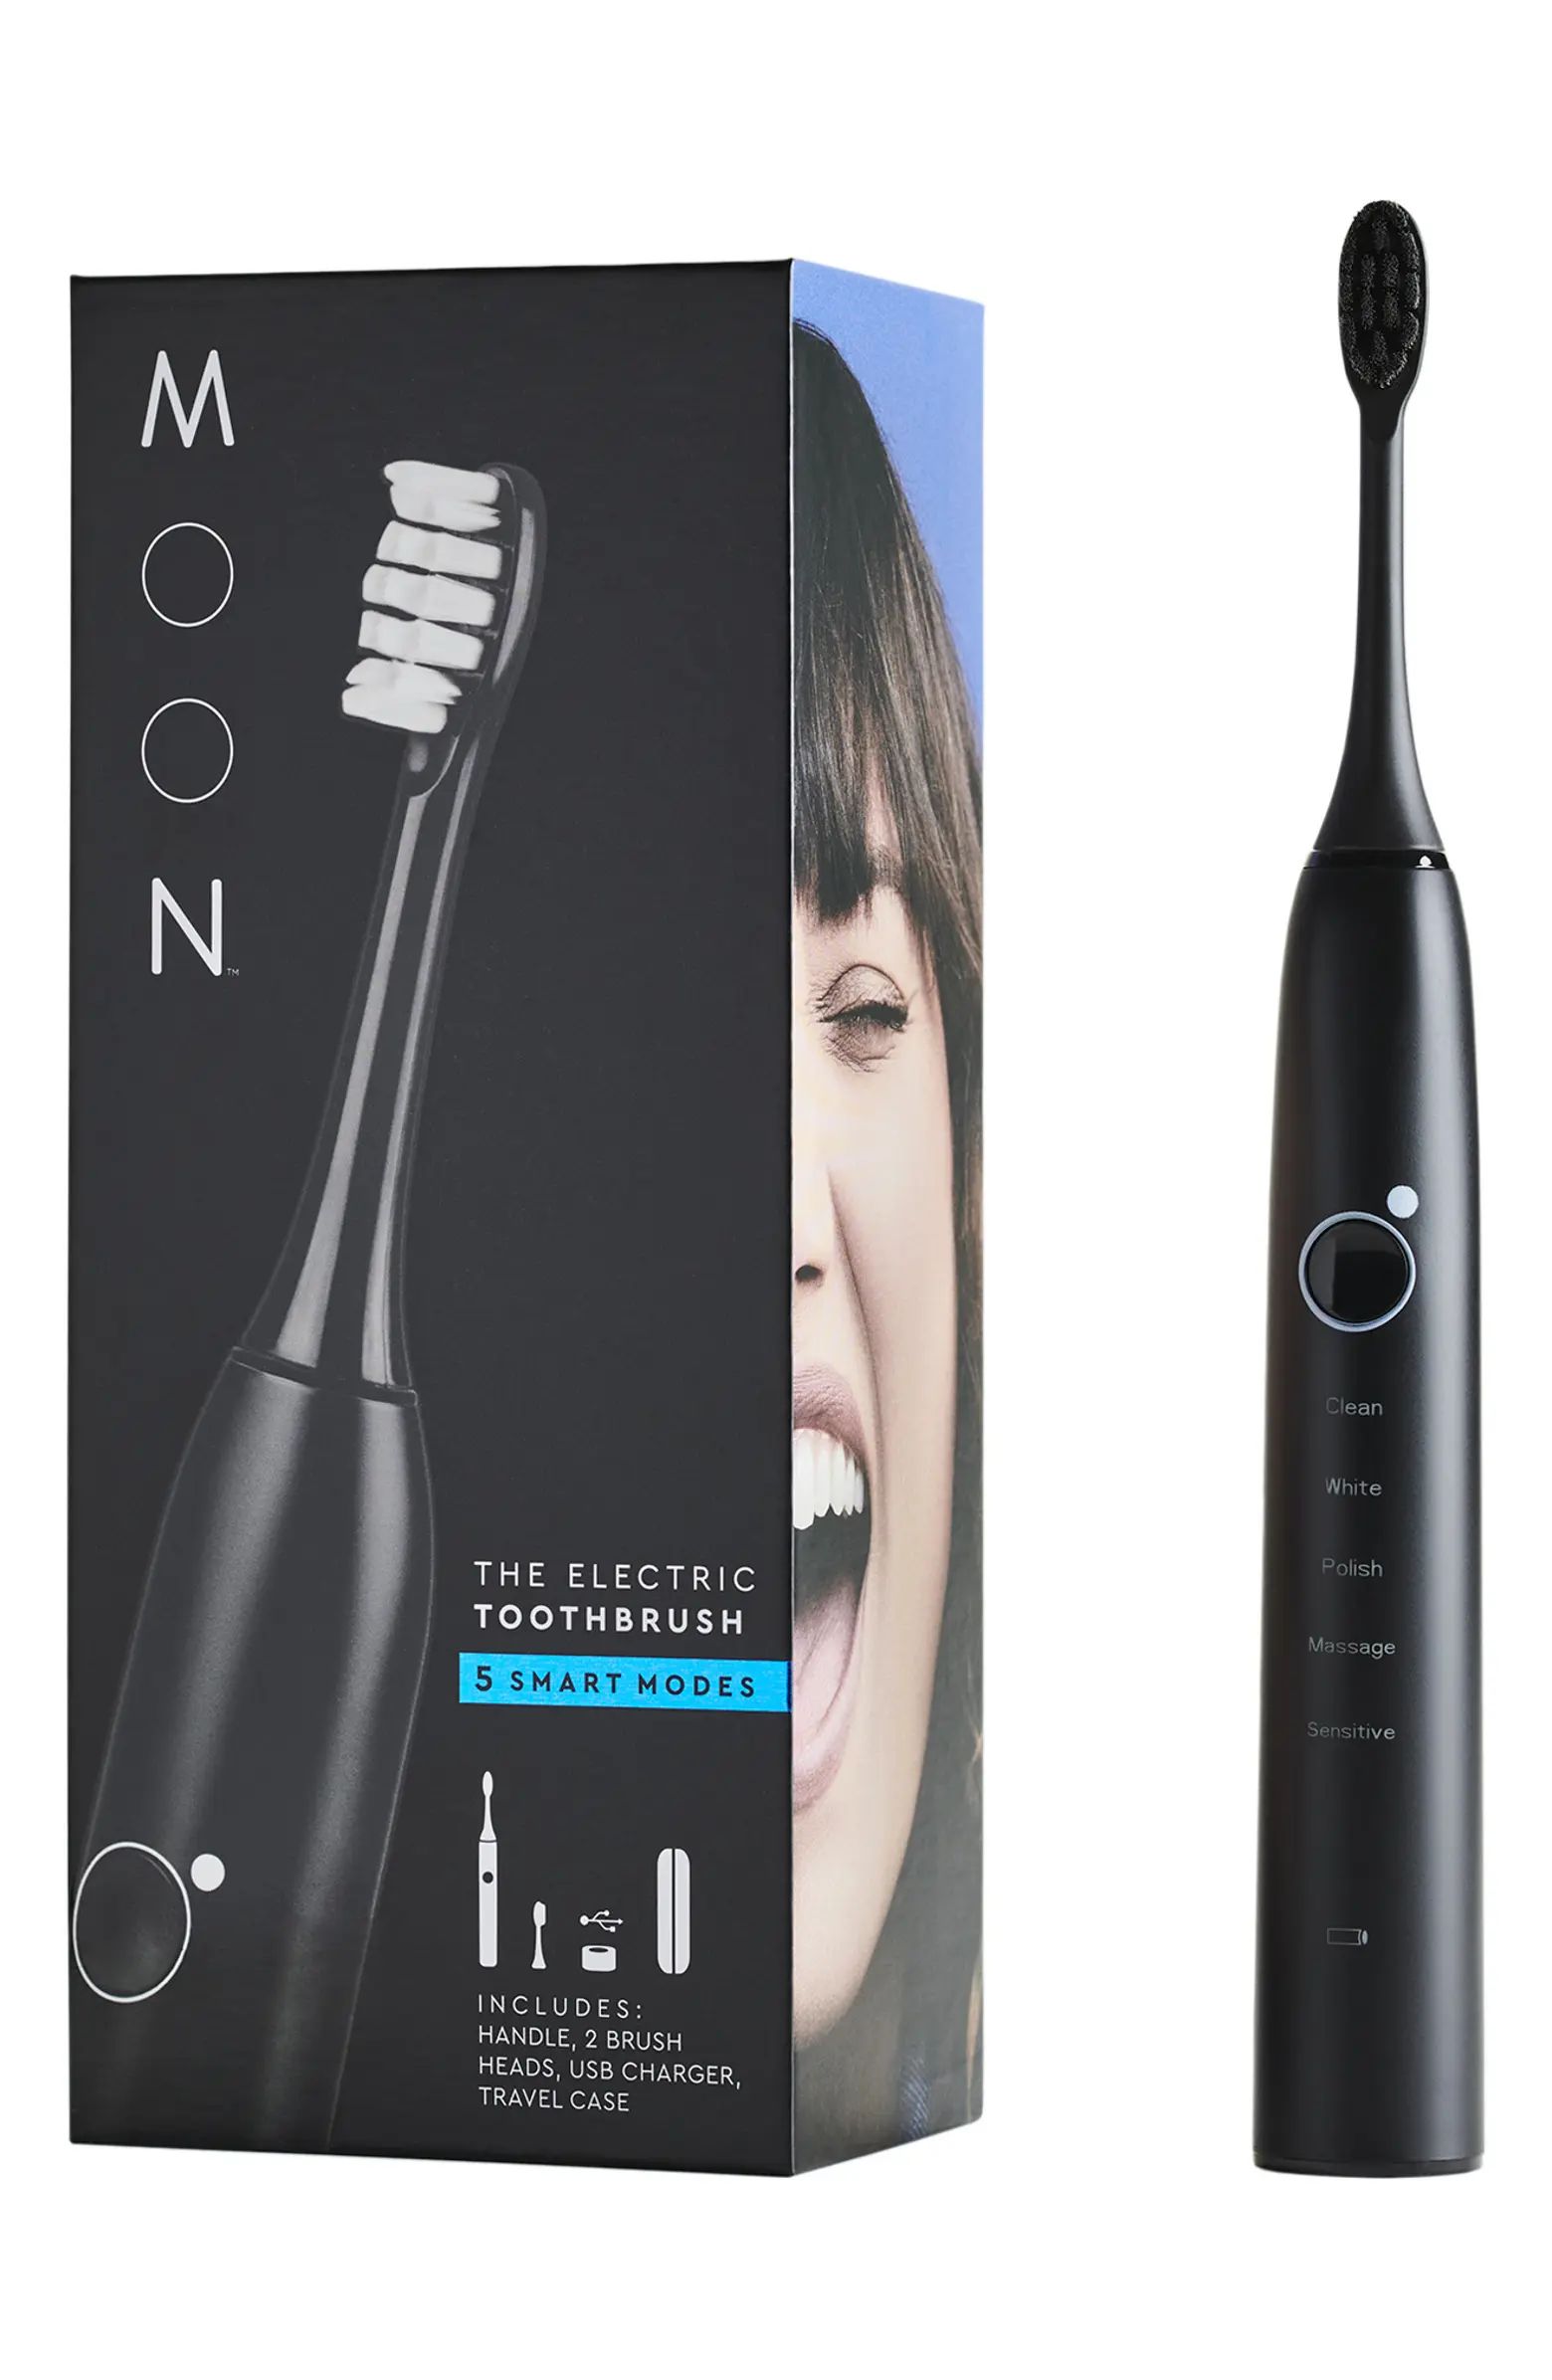 The Electric Toothbrush - Onyx | Nordstrom